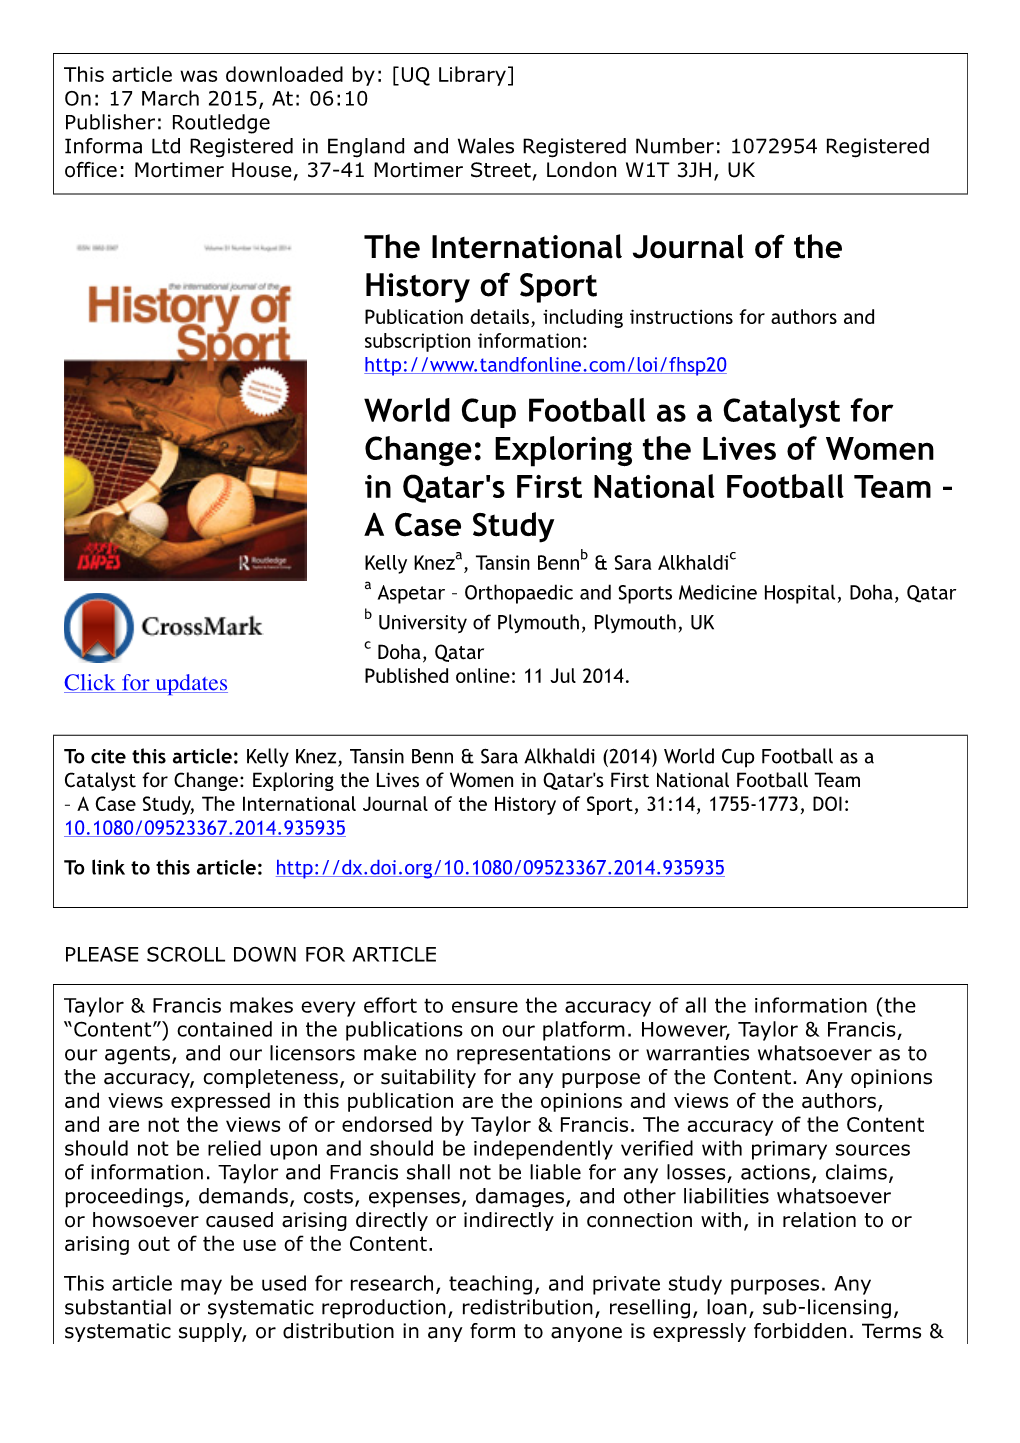 The International Journal of the History of Sport World Cup Football